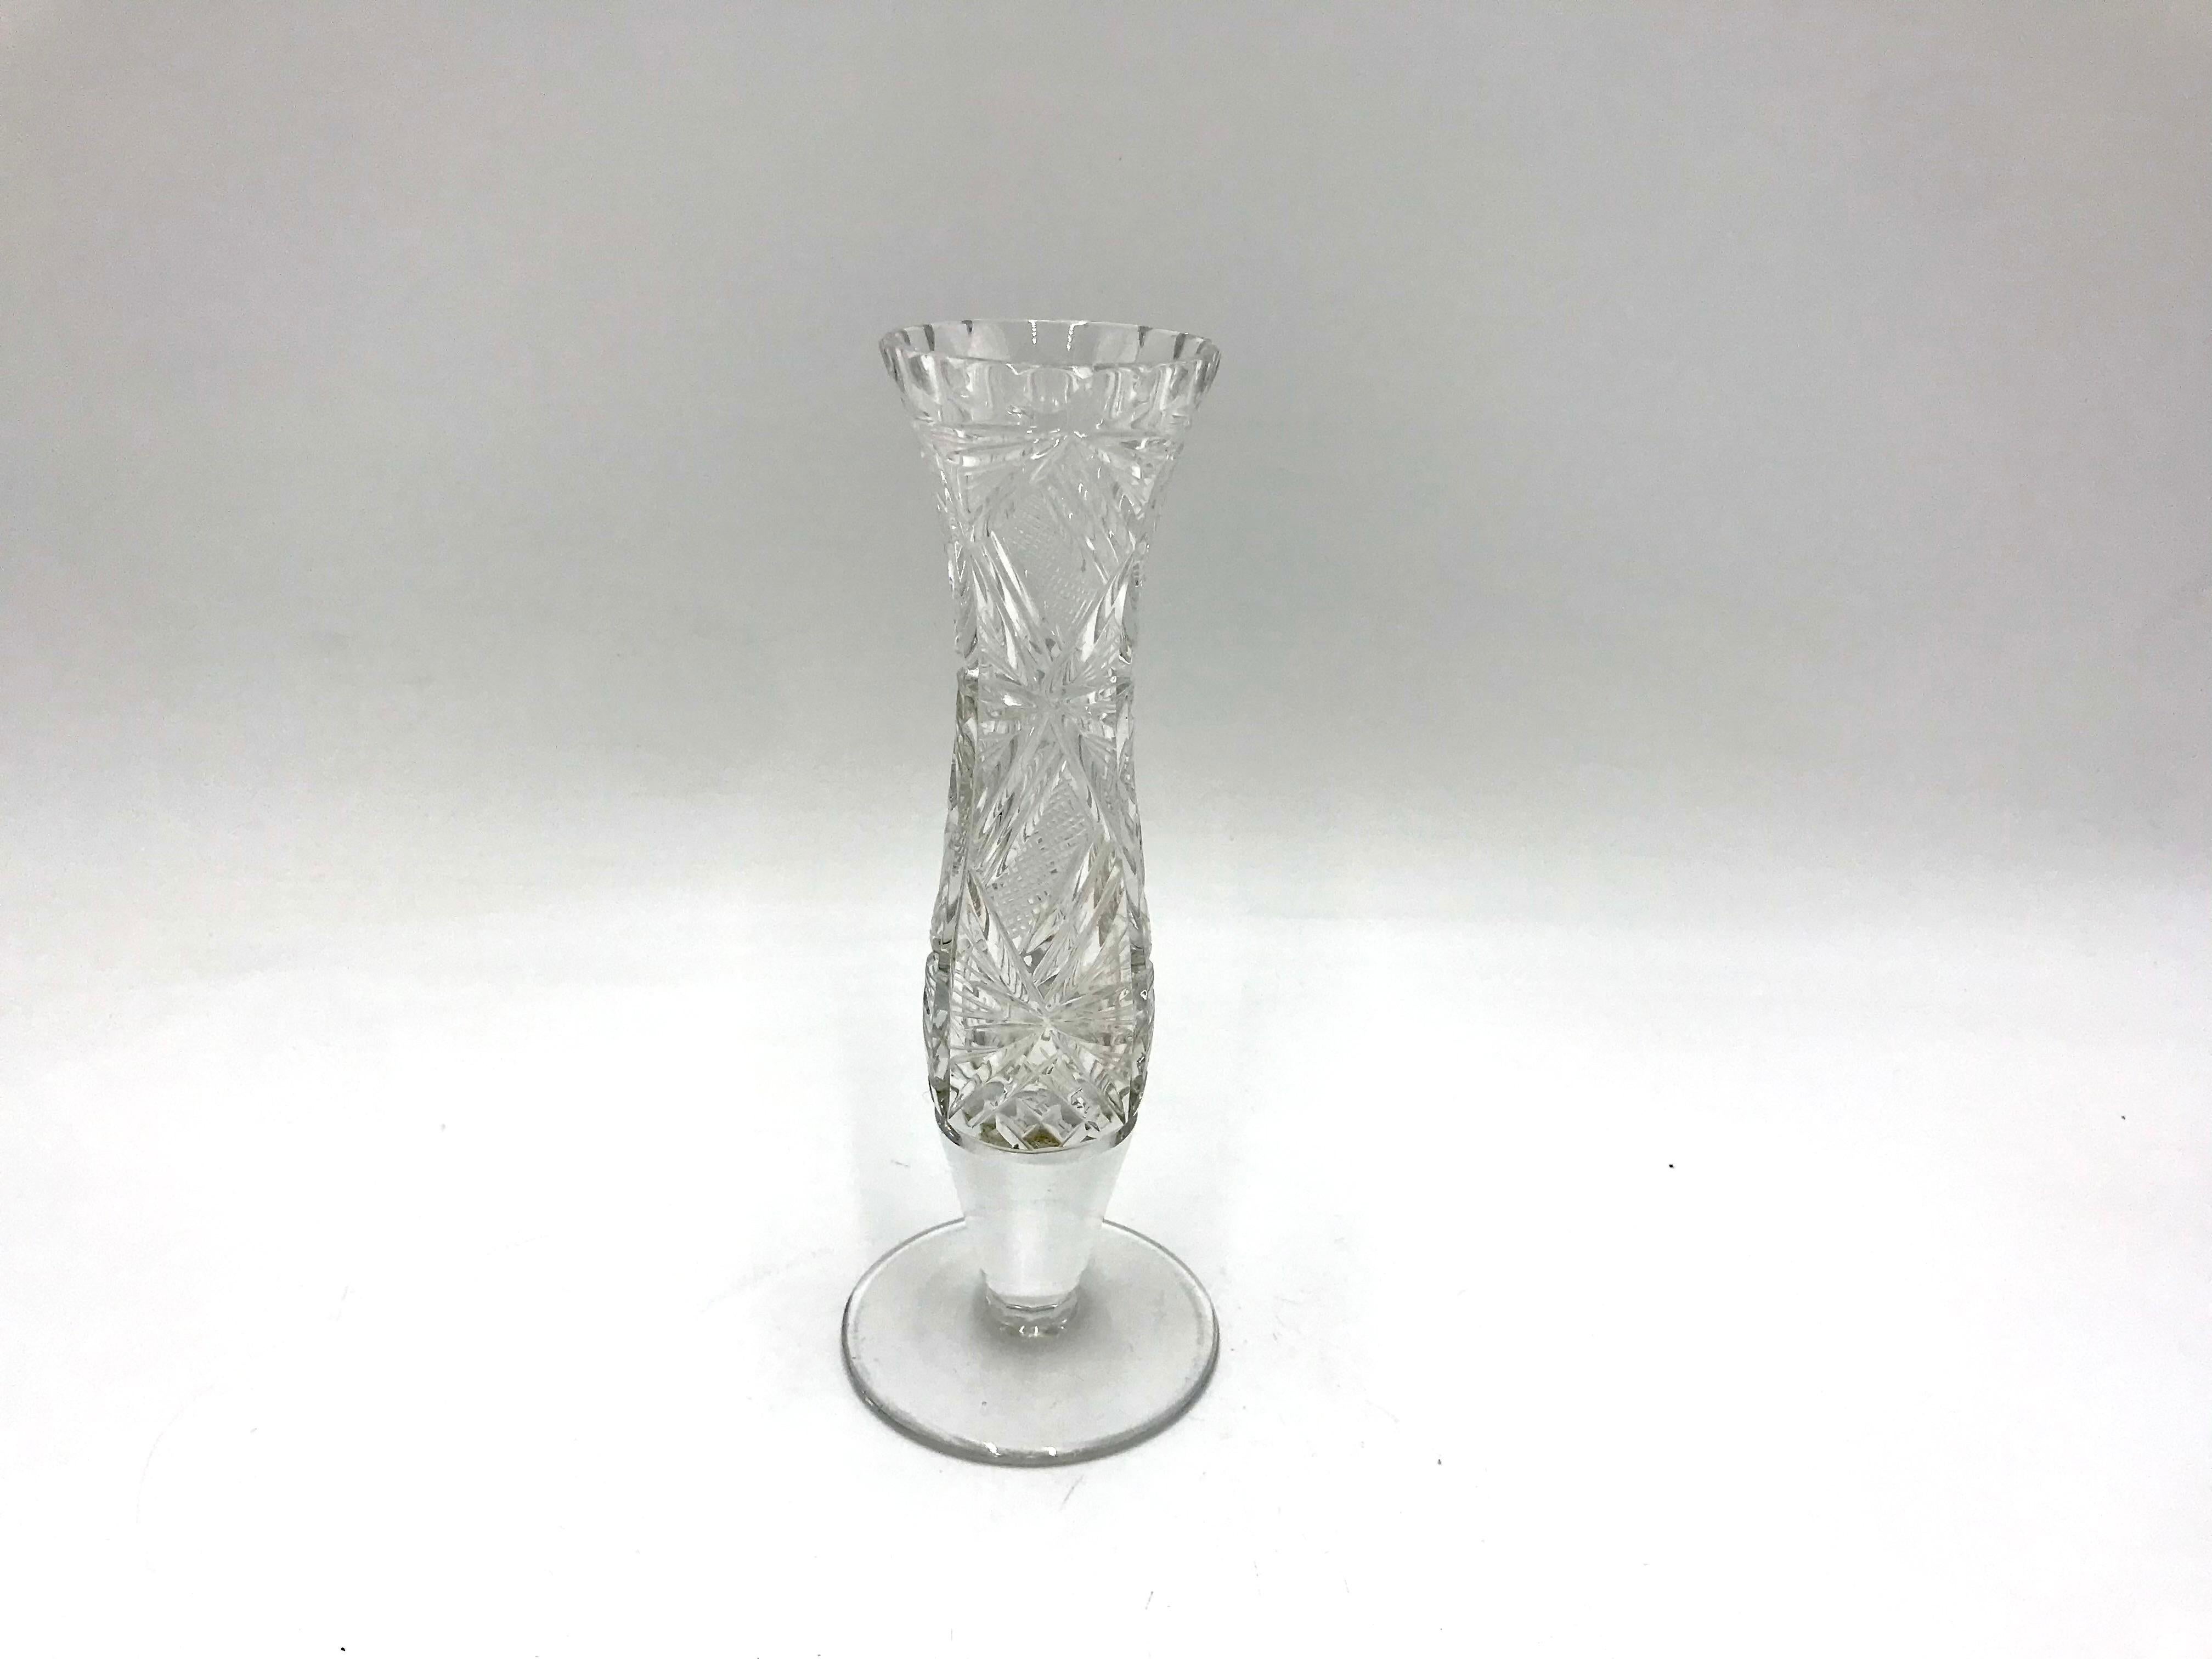 Vase made of crystal. 
The vase was produced in Poland in the 1960s and 1970s.
Vase in very good condition
Measures: Height 18cm / diameter 5cm.